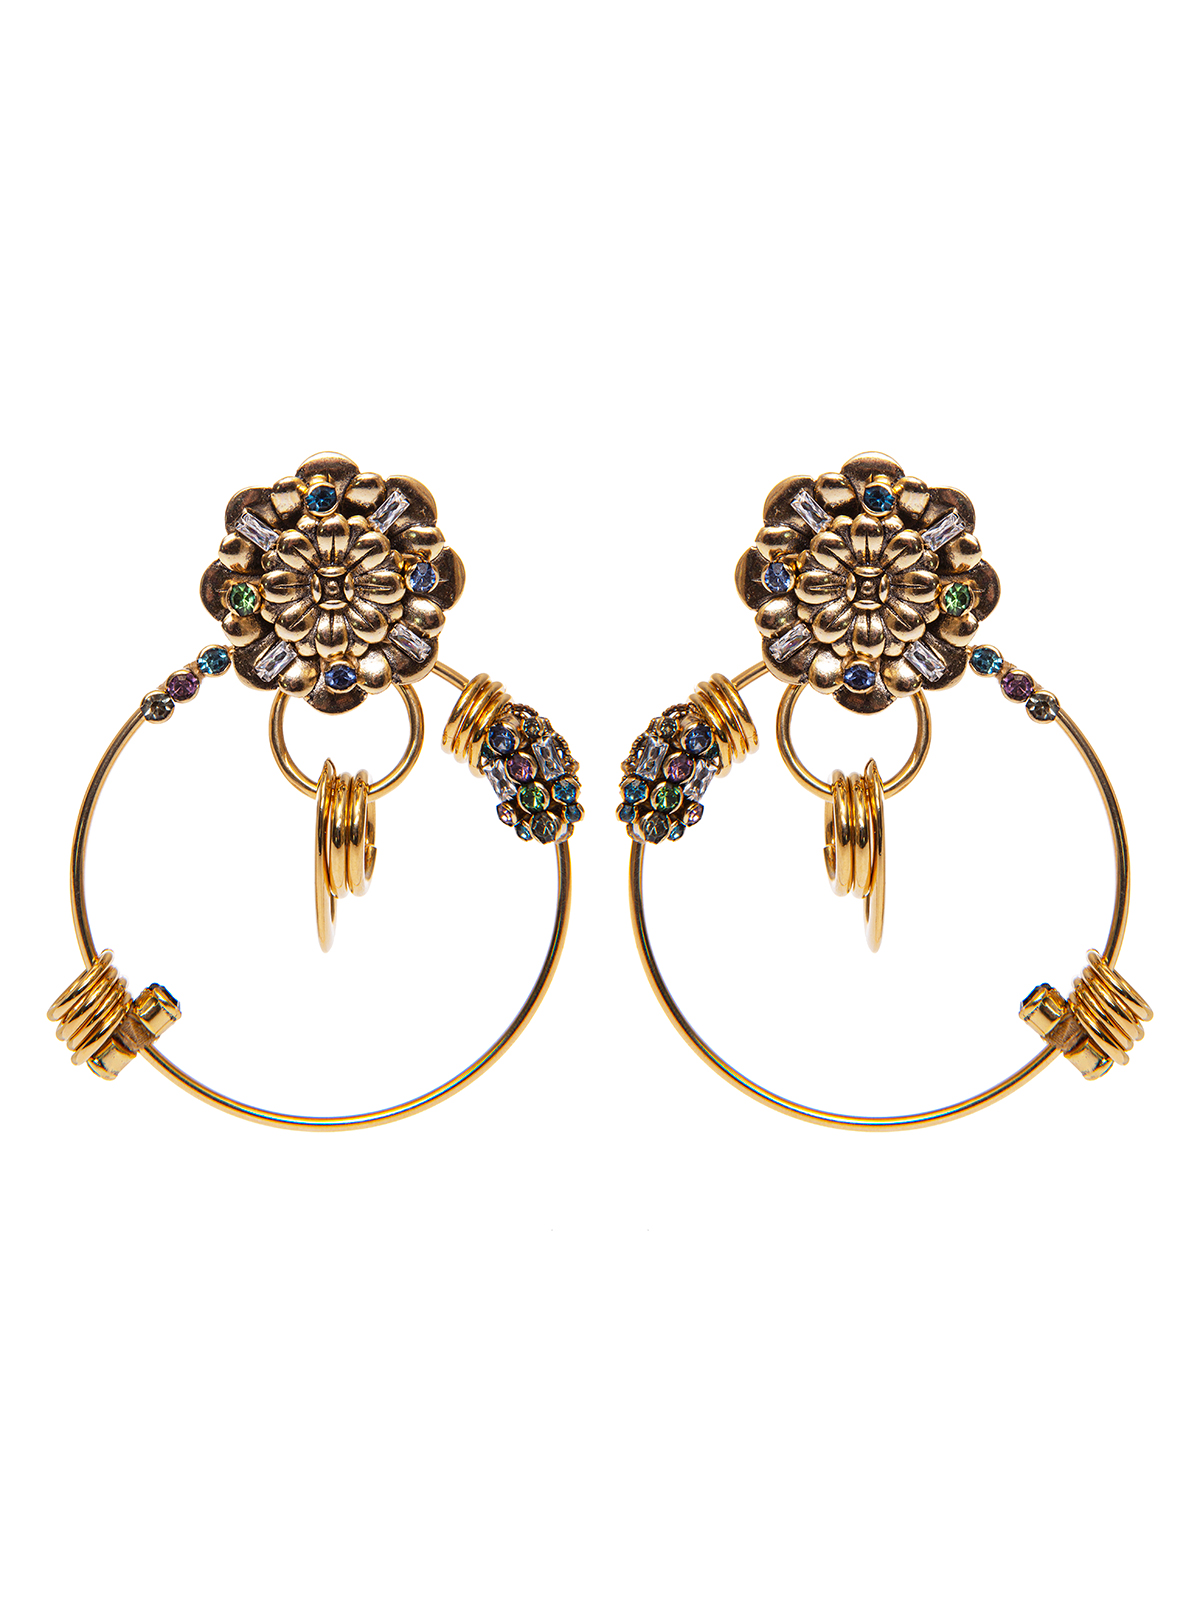 Flower earrings with multicolor stones and pendent hoops